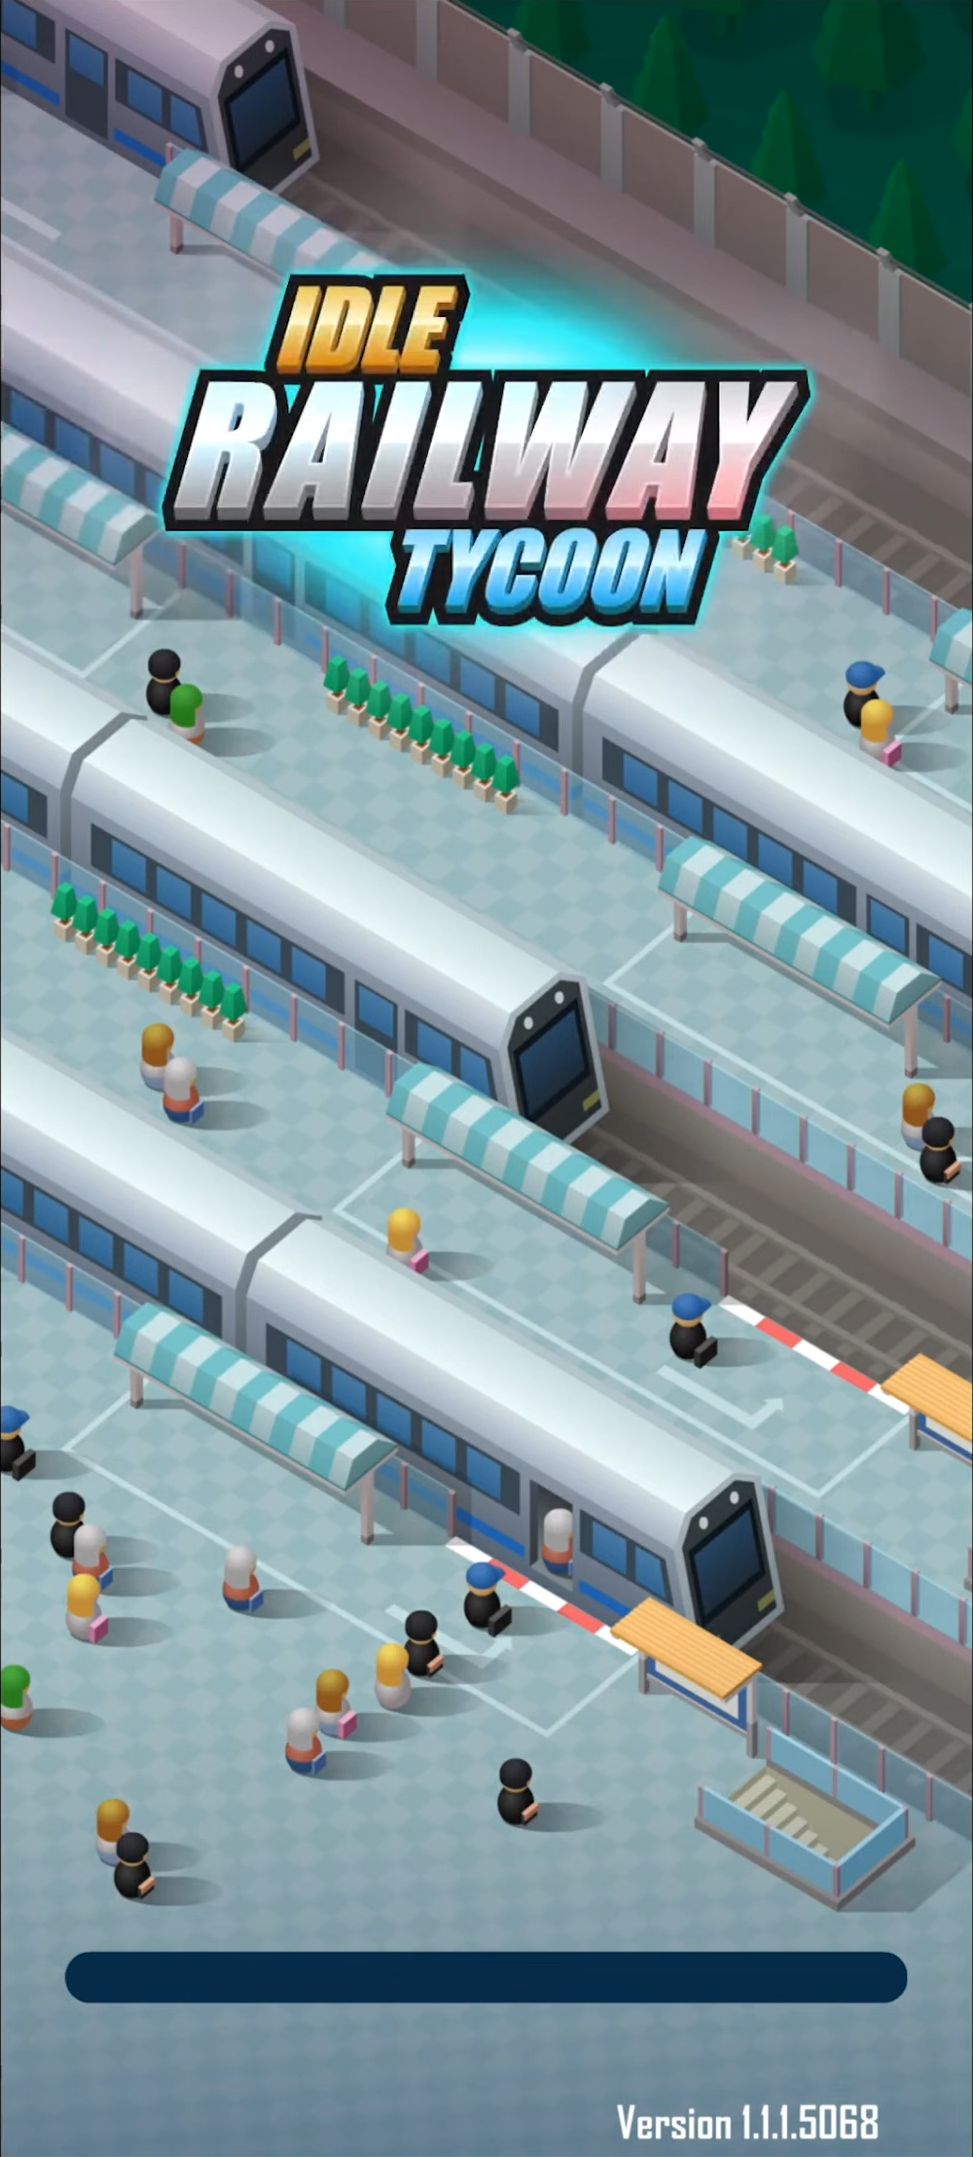 Scarica Idle Railway Tycoon gratis per Android.